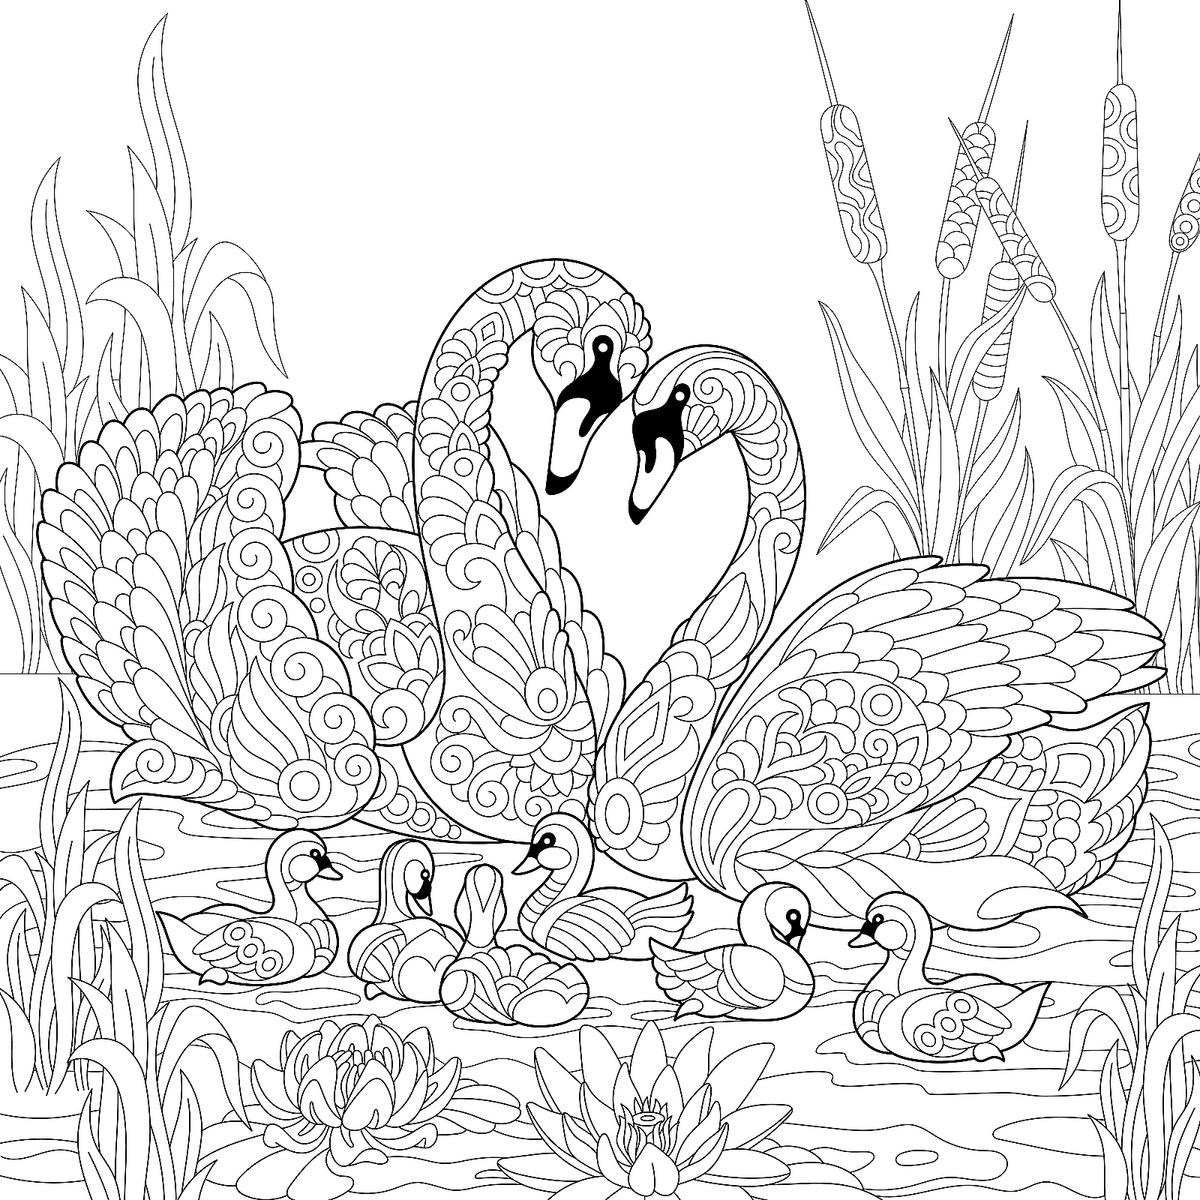 Animal families coloring pages free fun printable coloring pages of animal families printables mom